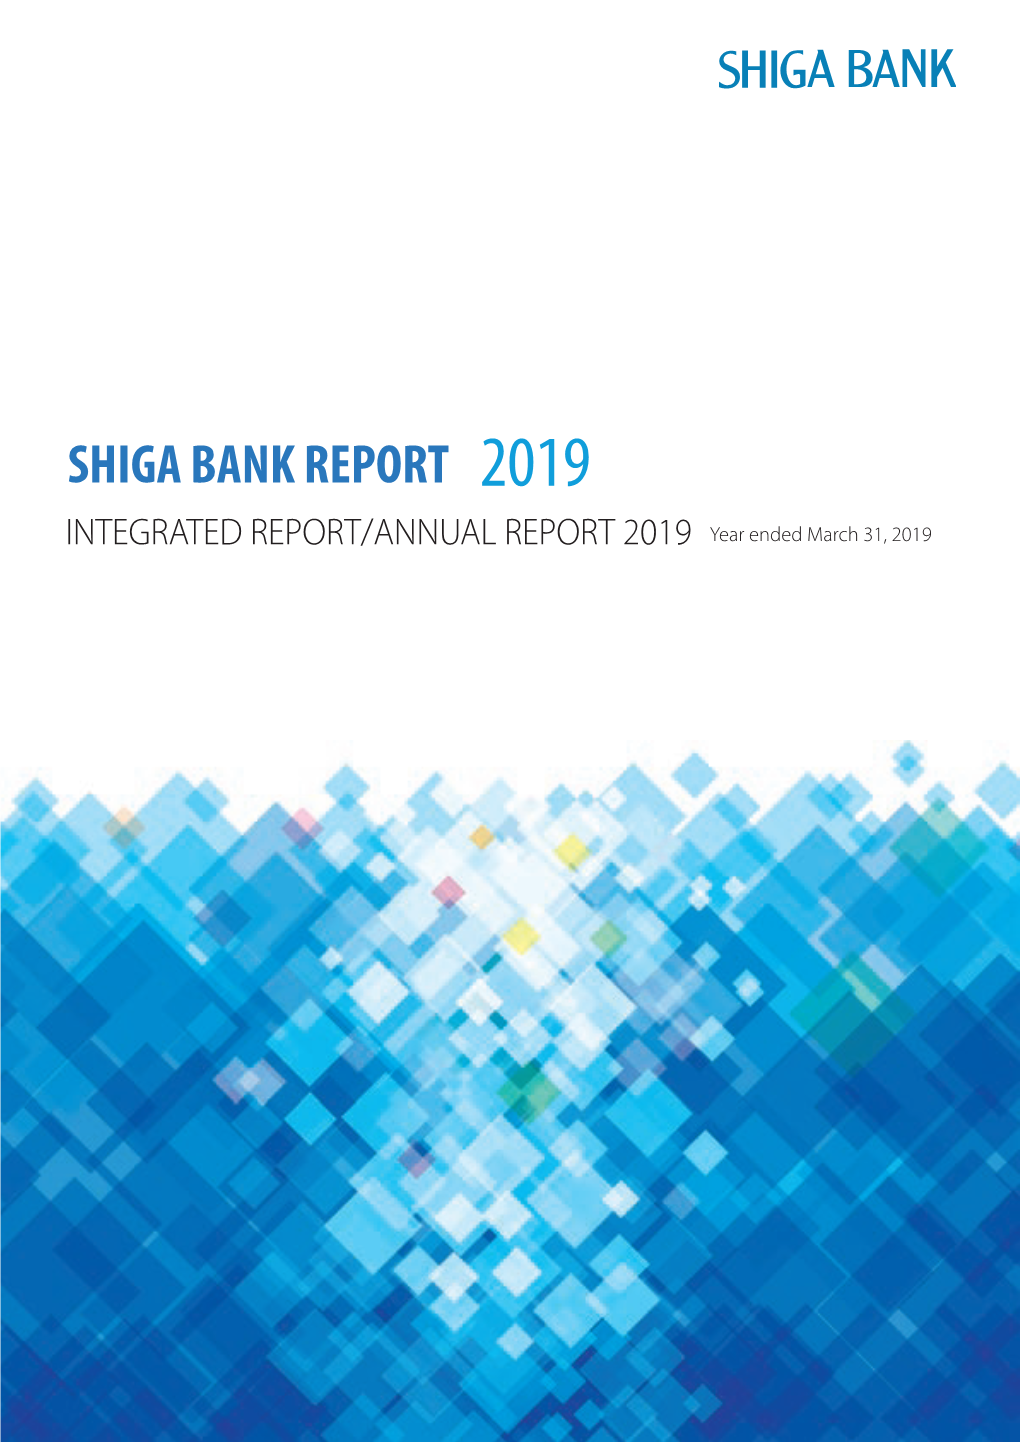 SHIGA BANK REPORT 2019 INTEGRATED REPORT/ANNUAL REPORT 2019 Year Ended March 31, 2019